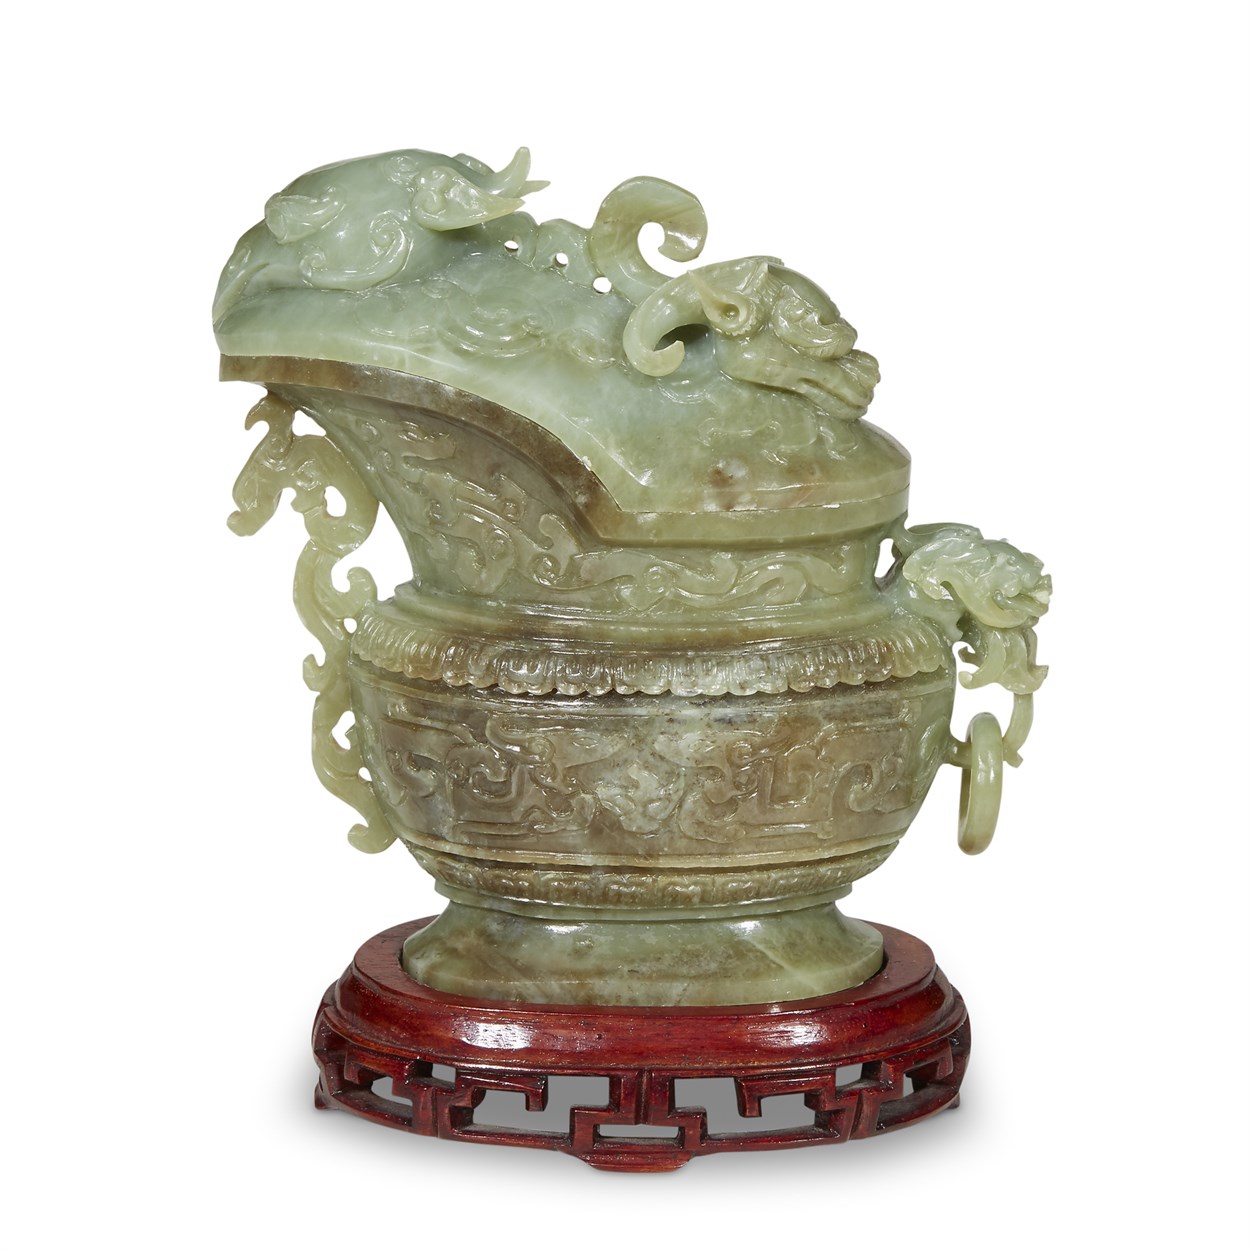 Lot 135 - A Chinese celadon and green jade Guang-form vessel and cover